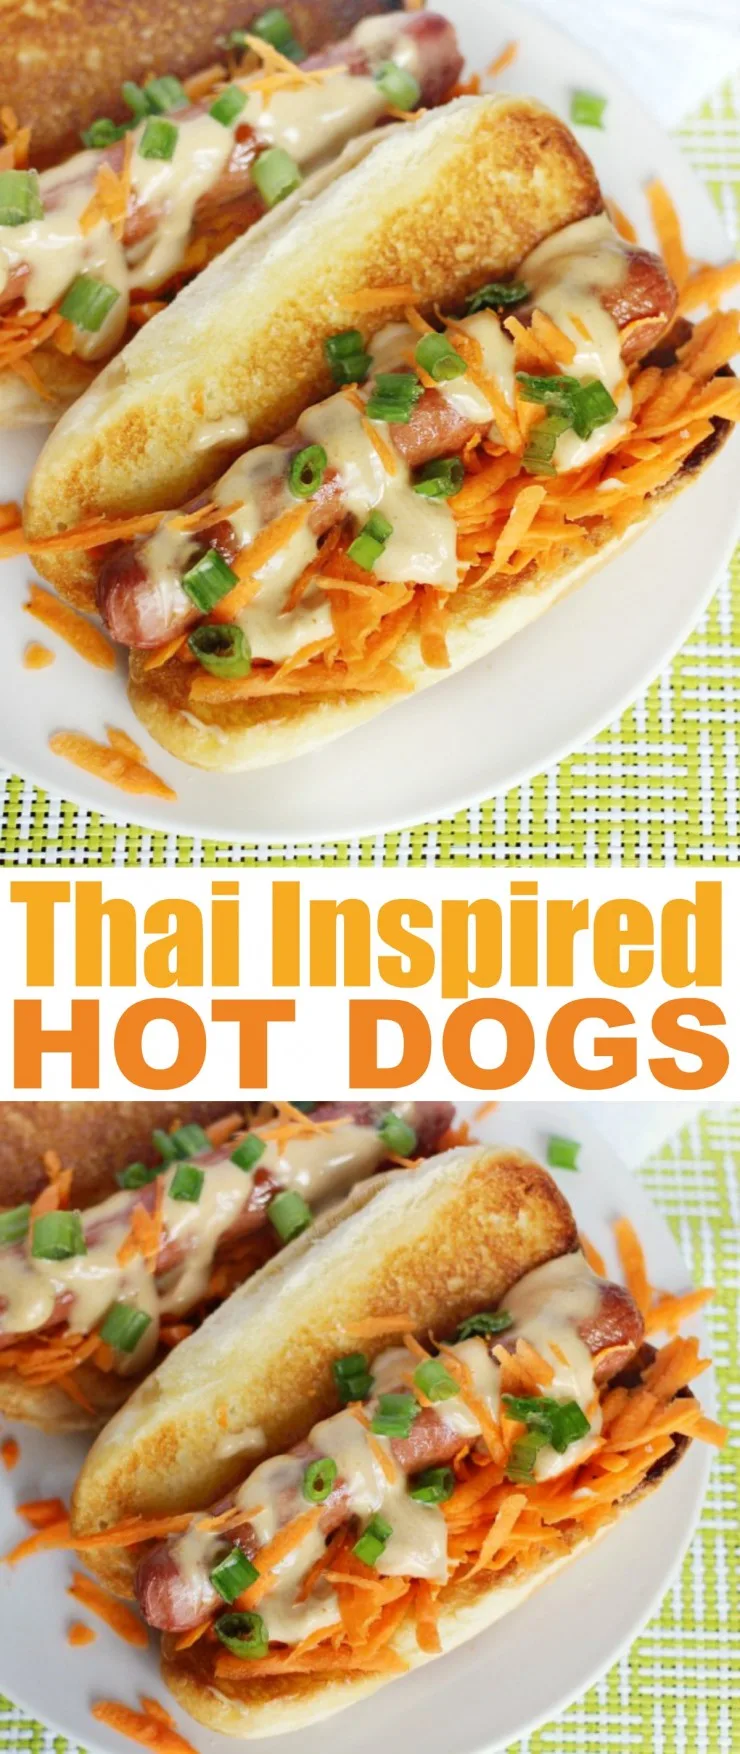 Thai Inspired Hot Dogs are an easy and gourmet hot dog lunch idea everyone will love!